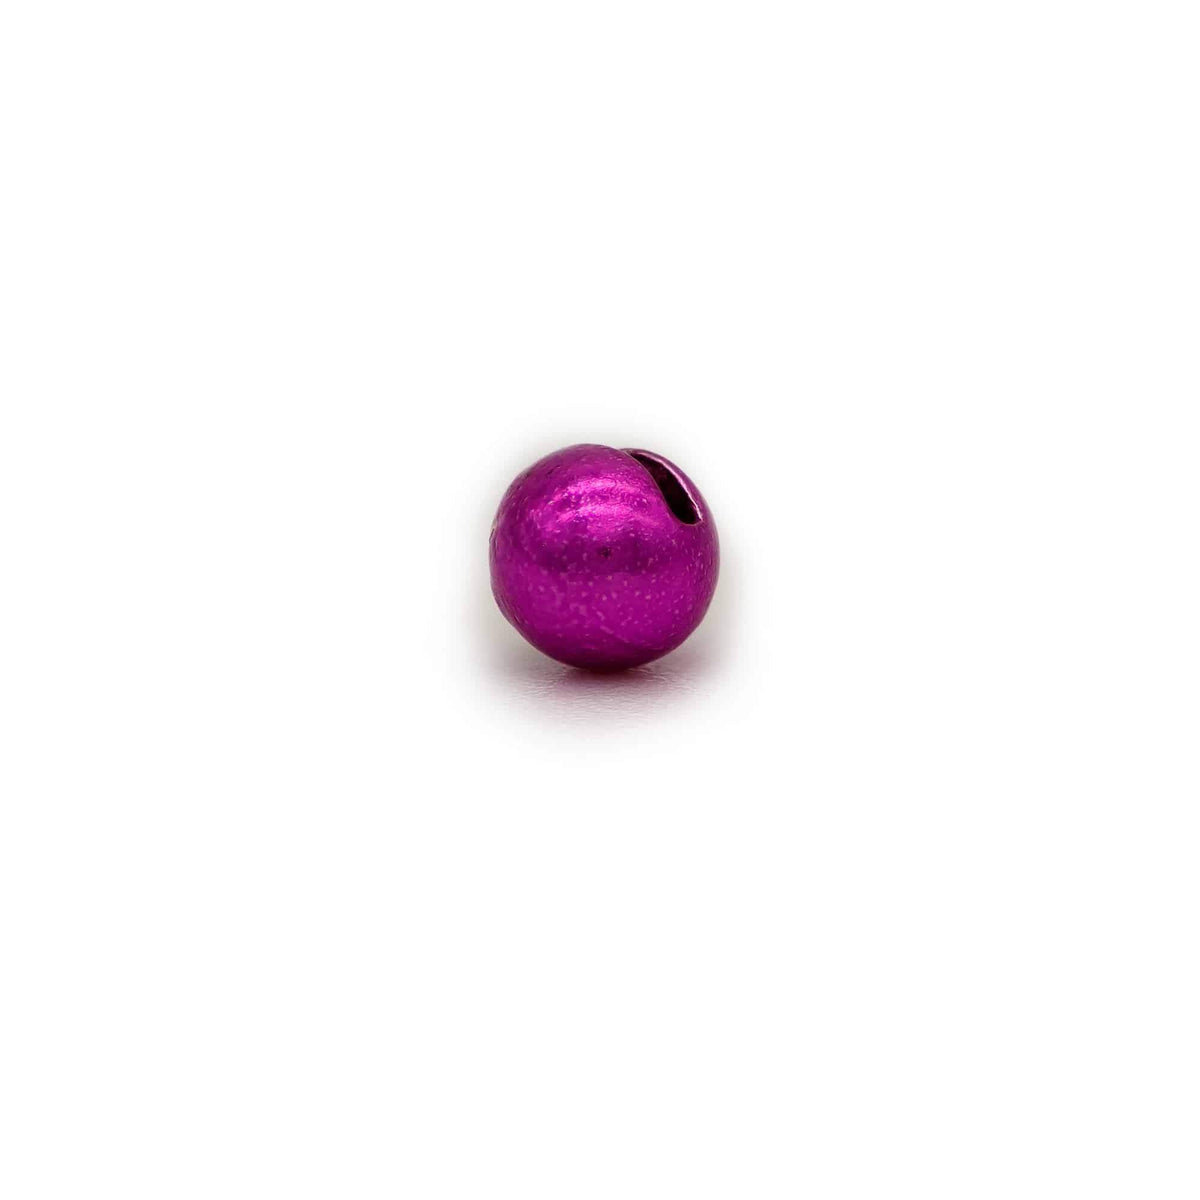 Hanak Competition Slotted Metallic+ Plus Tungsten Beads Light Violet